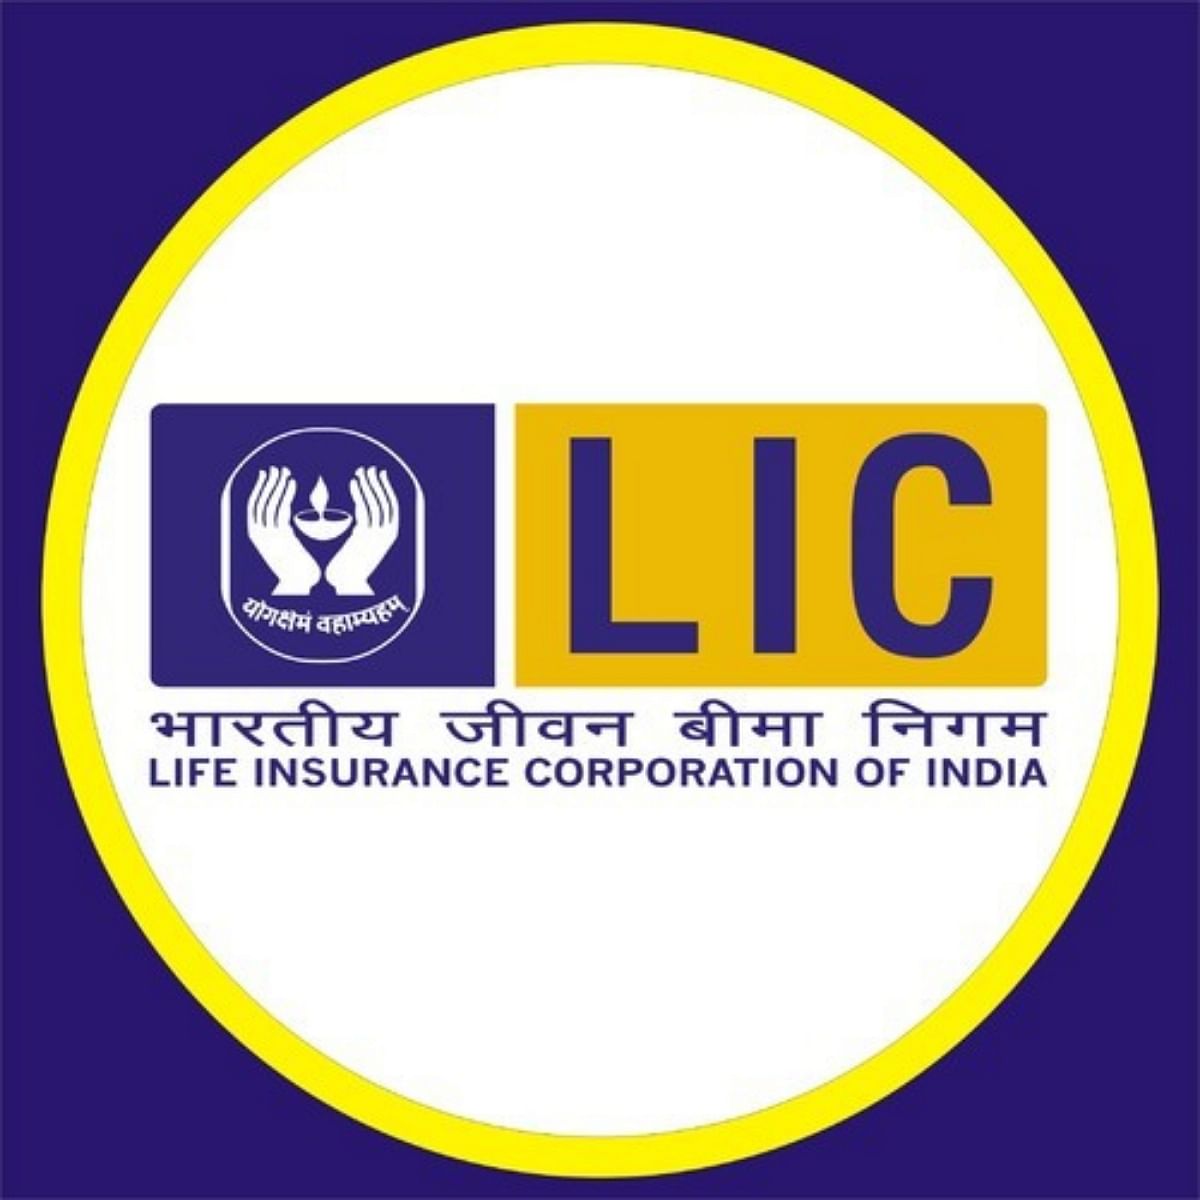 LIC Assistant Mains 2019 Result Declared, Steps to Check Here